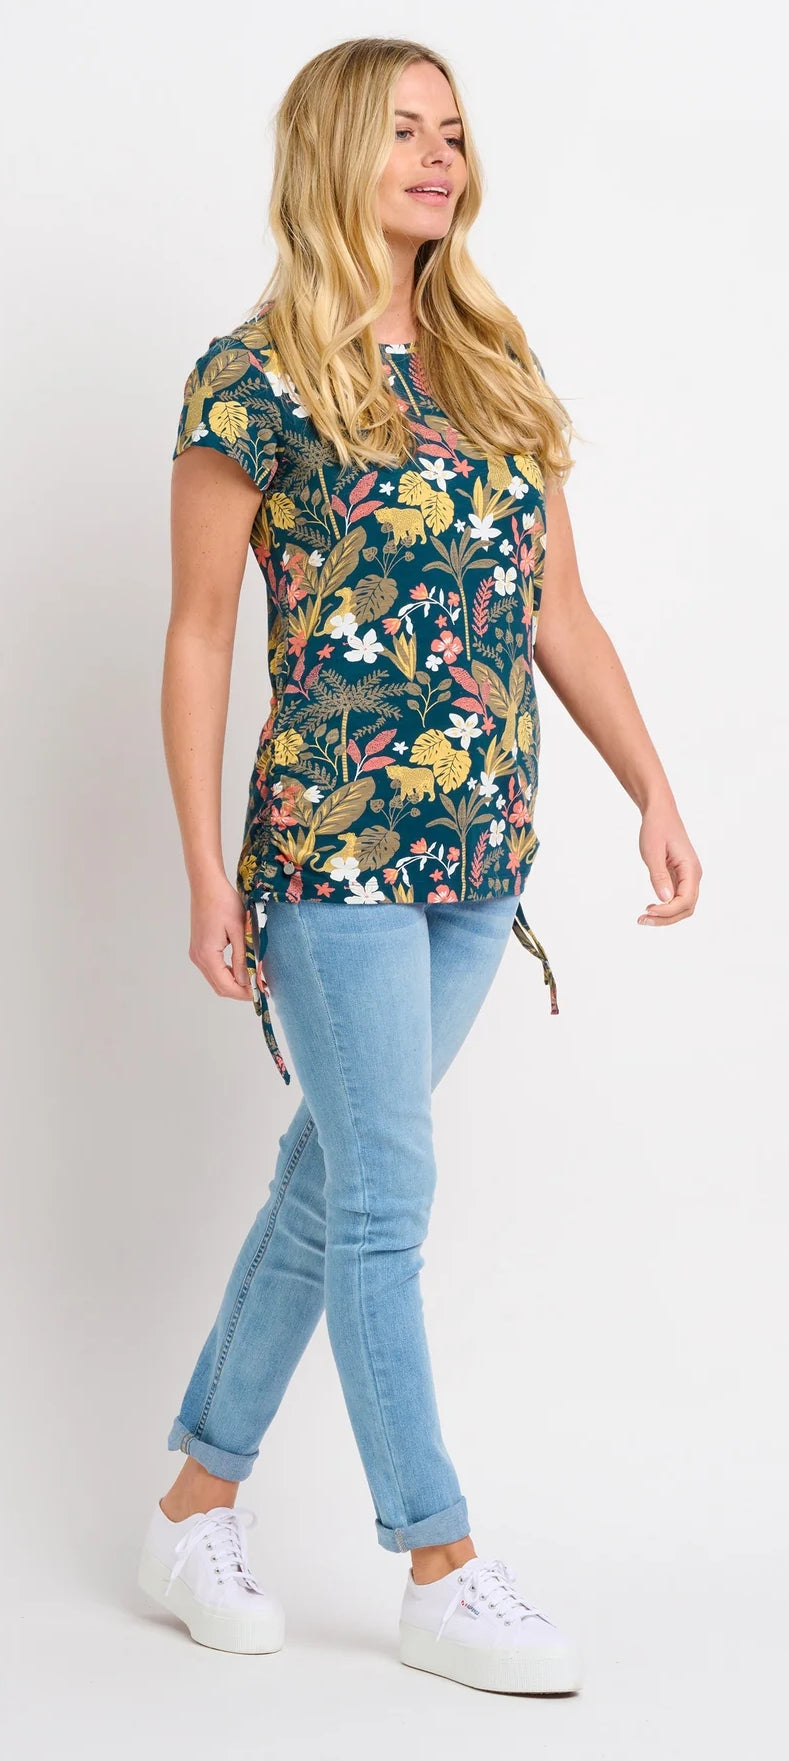 A short sleeve jungle floral print women's tee from Brakeburn